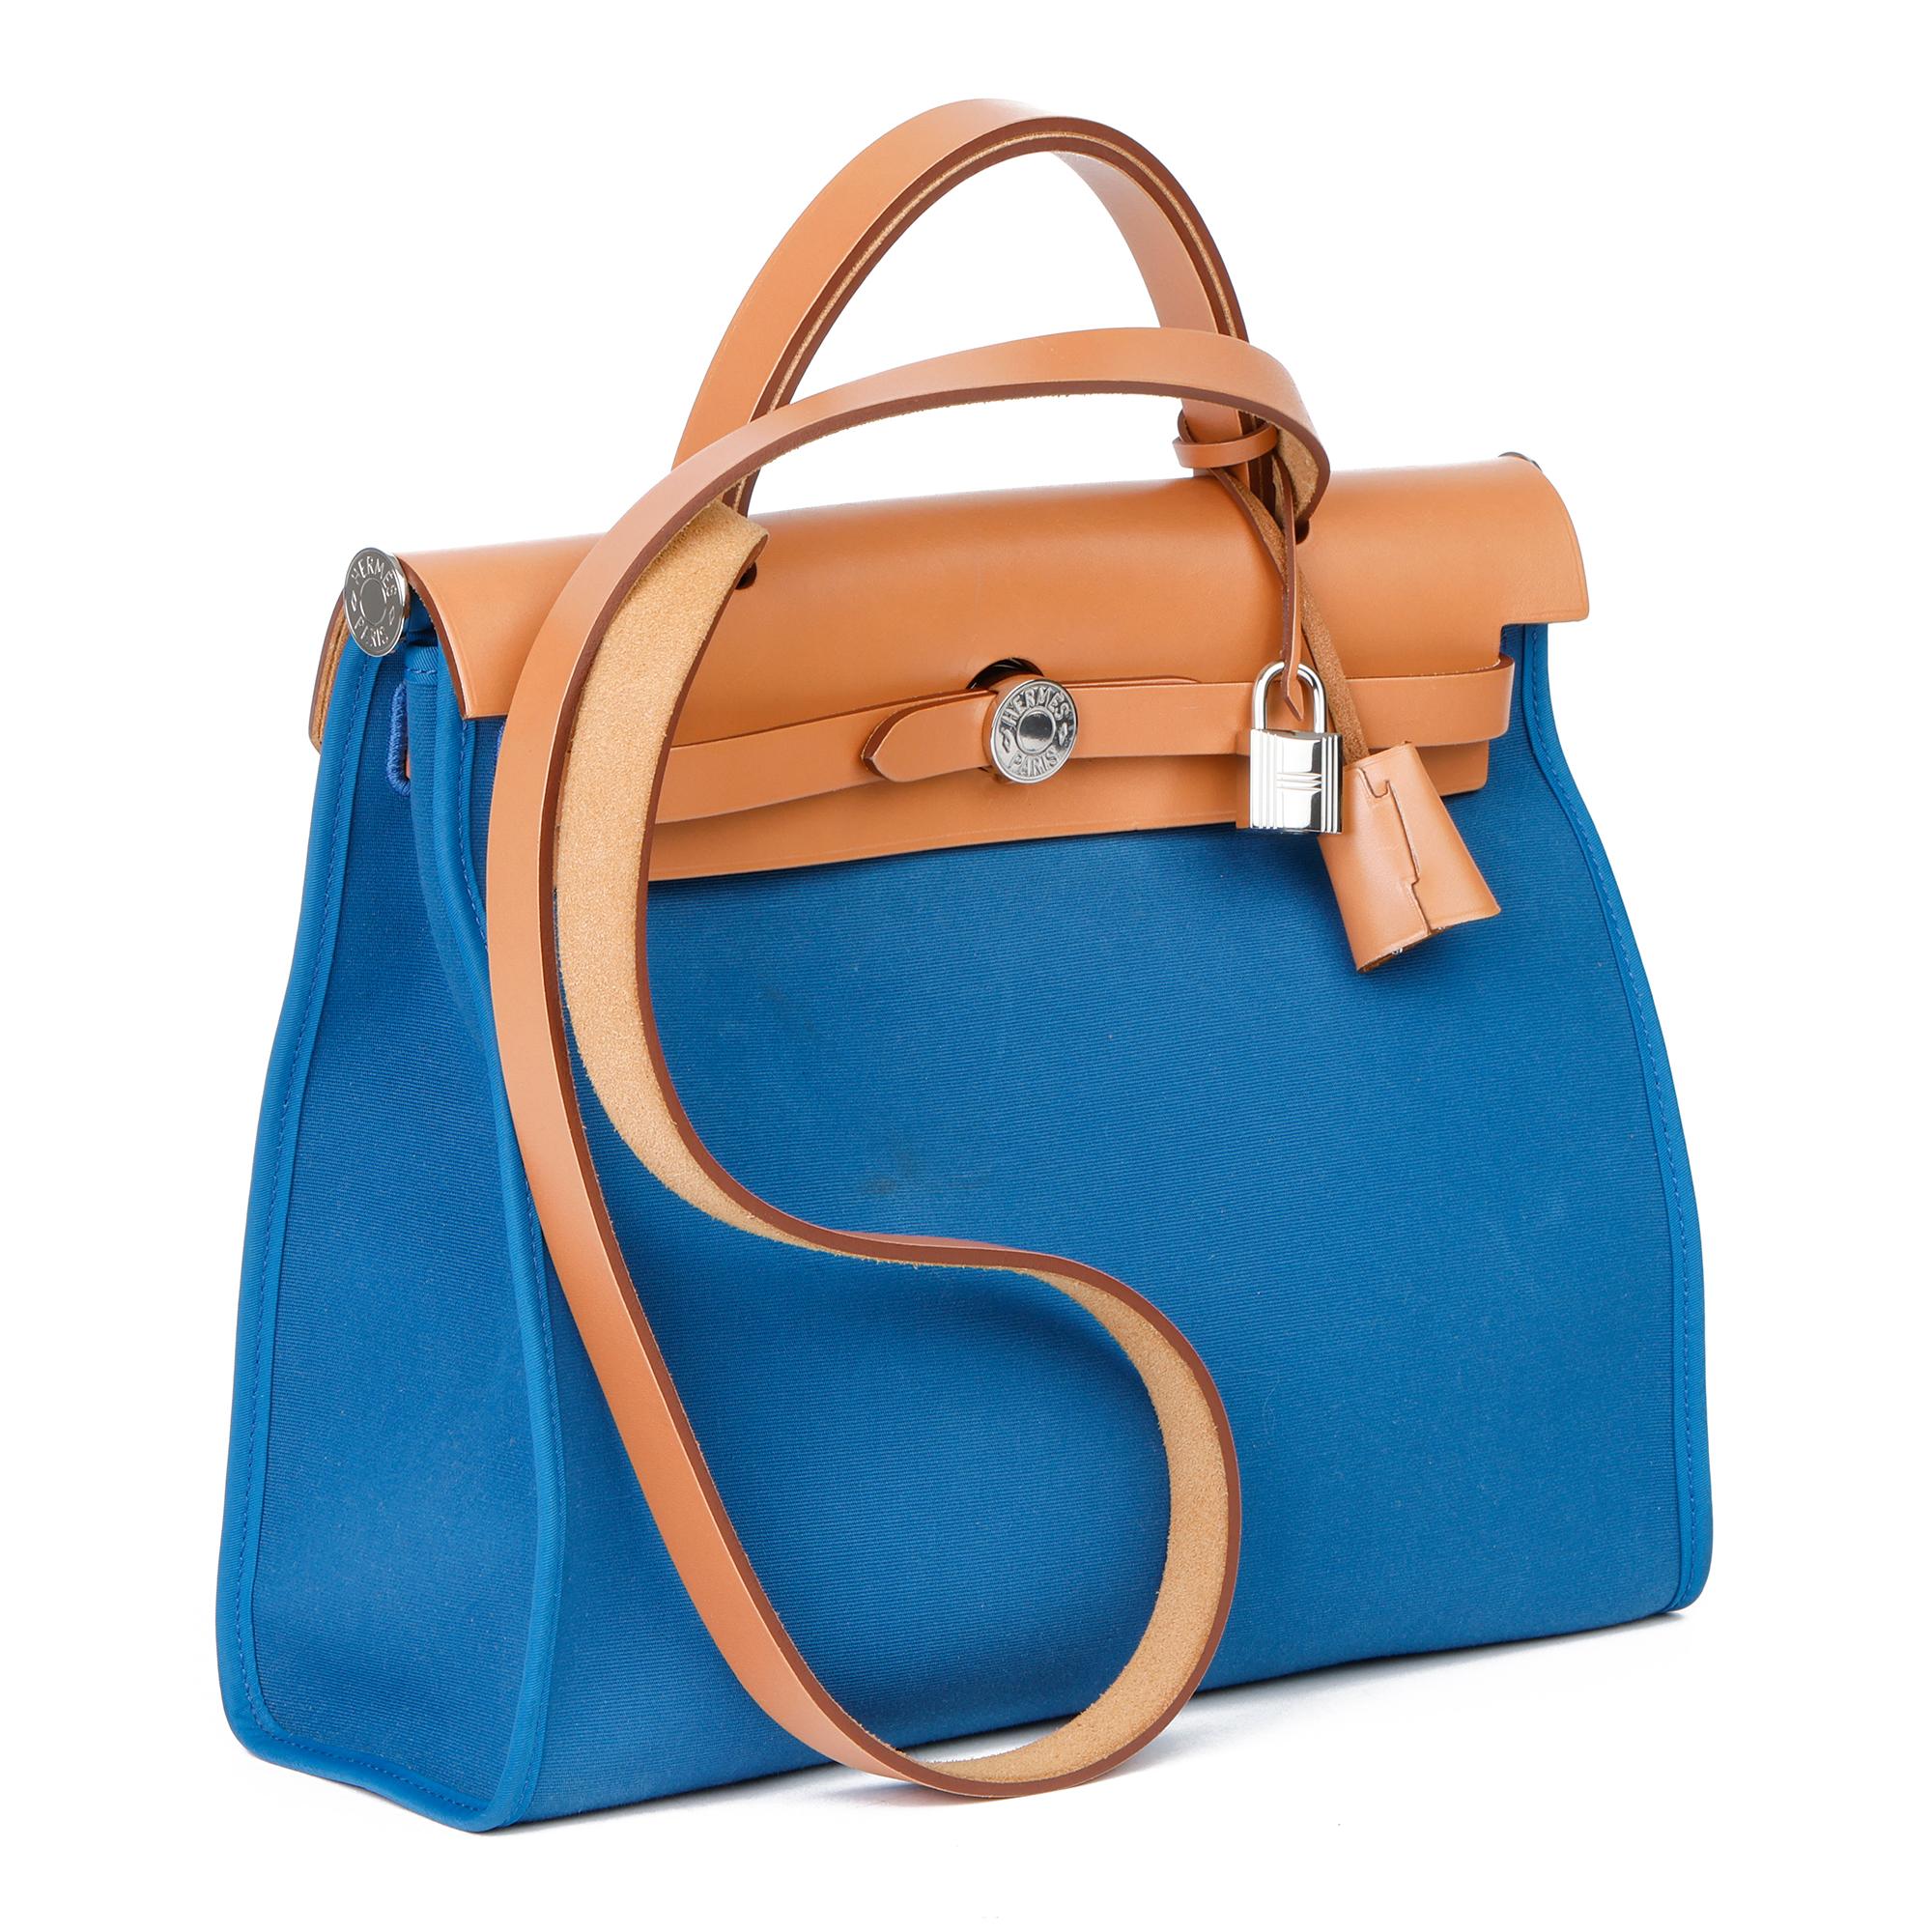 HERMÈS
Natural Vache Hunter Cowhide Leather & Blue Ocean Canvas Herbag Zip 31

Xupes Reference: CB354
Serial Number: X
Age (Circa): 2016
Accompanied By: Hermès Box, Dust Bag, Lock, Keys, Clochette, Interior Pouch
Authenticity Details: Date Stamp